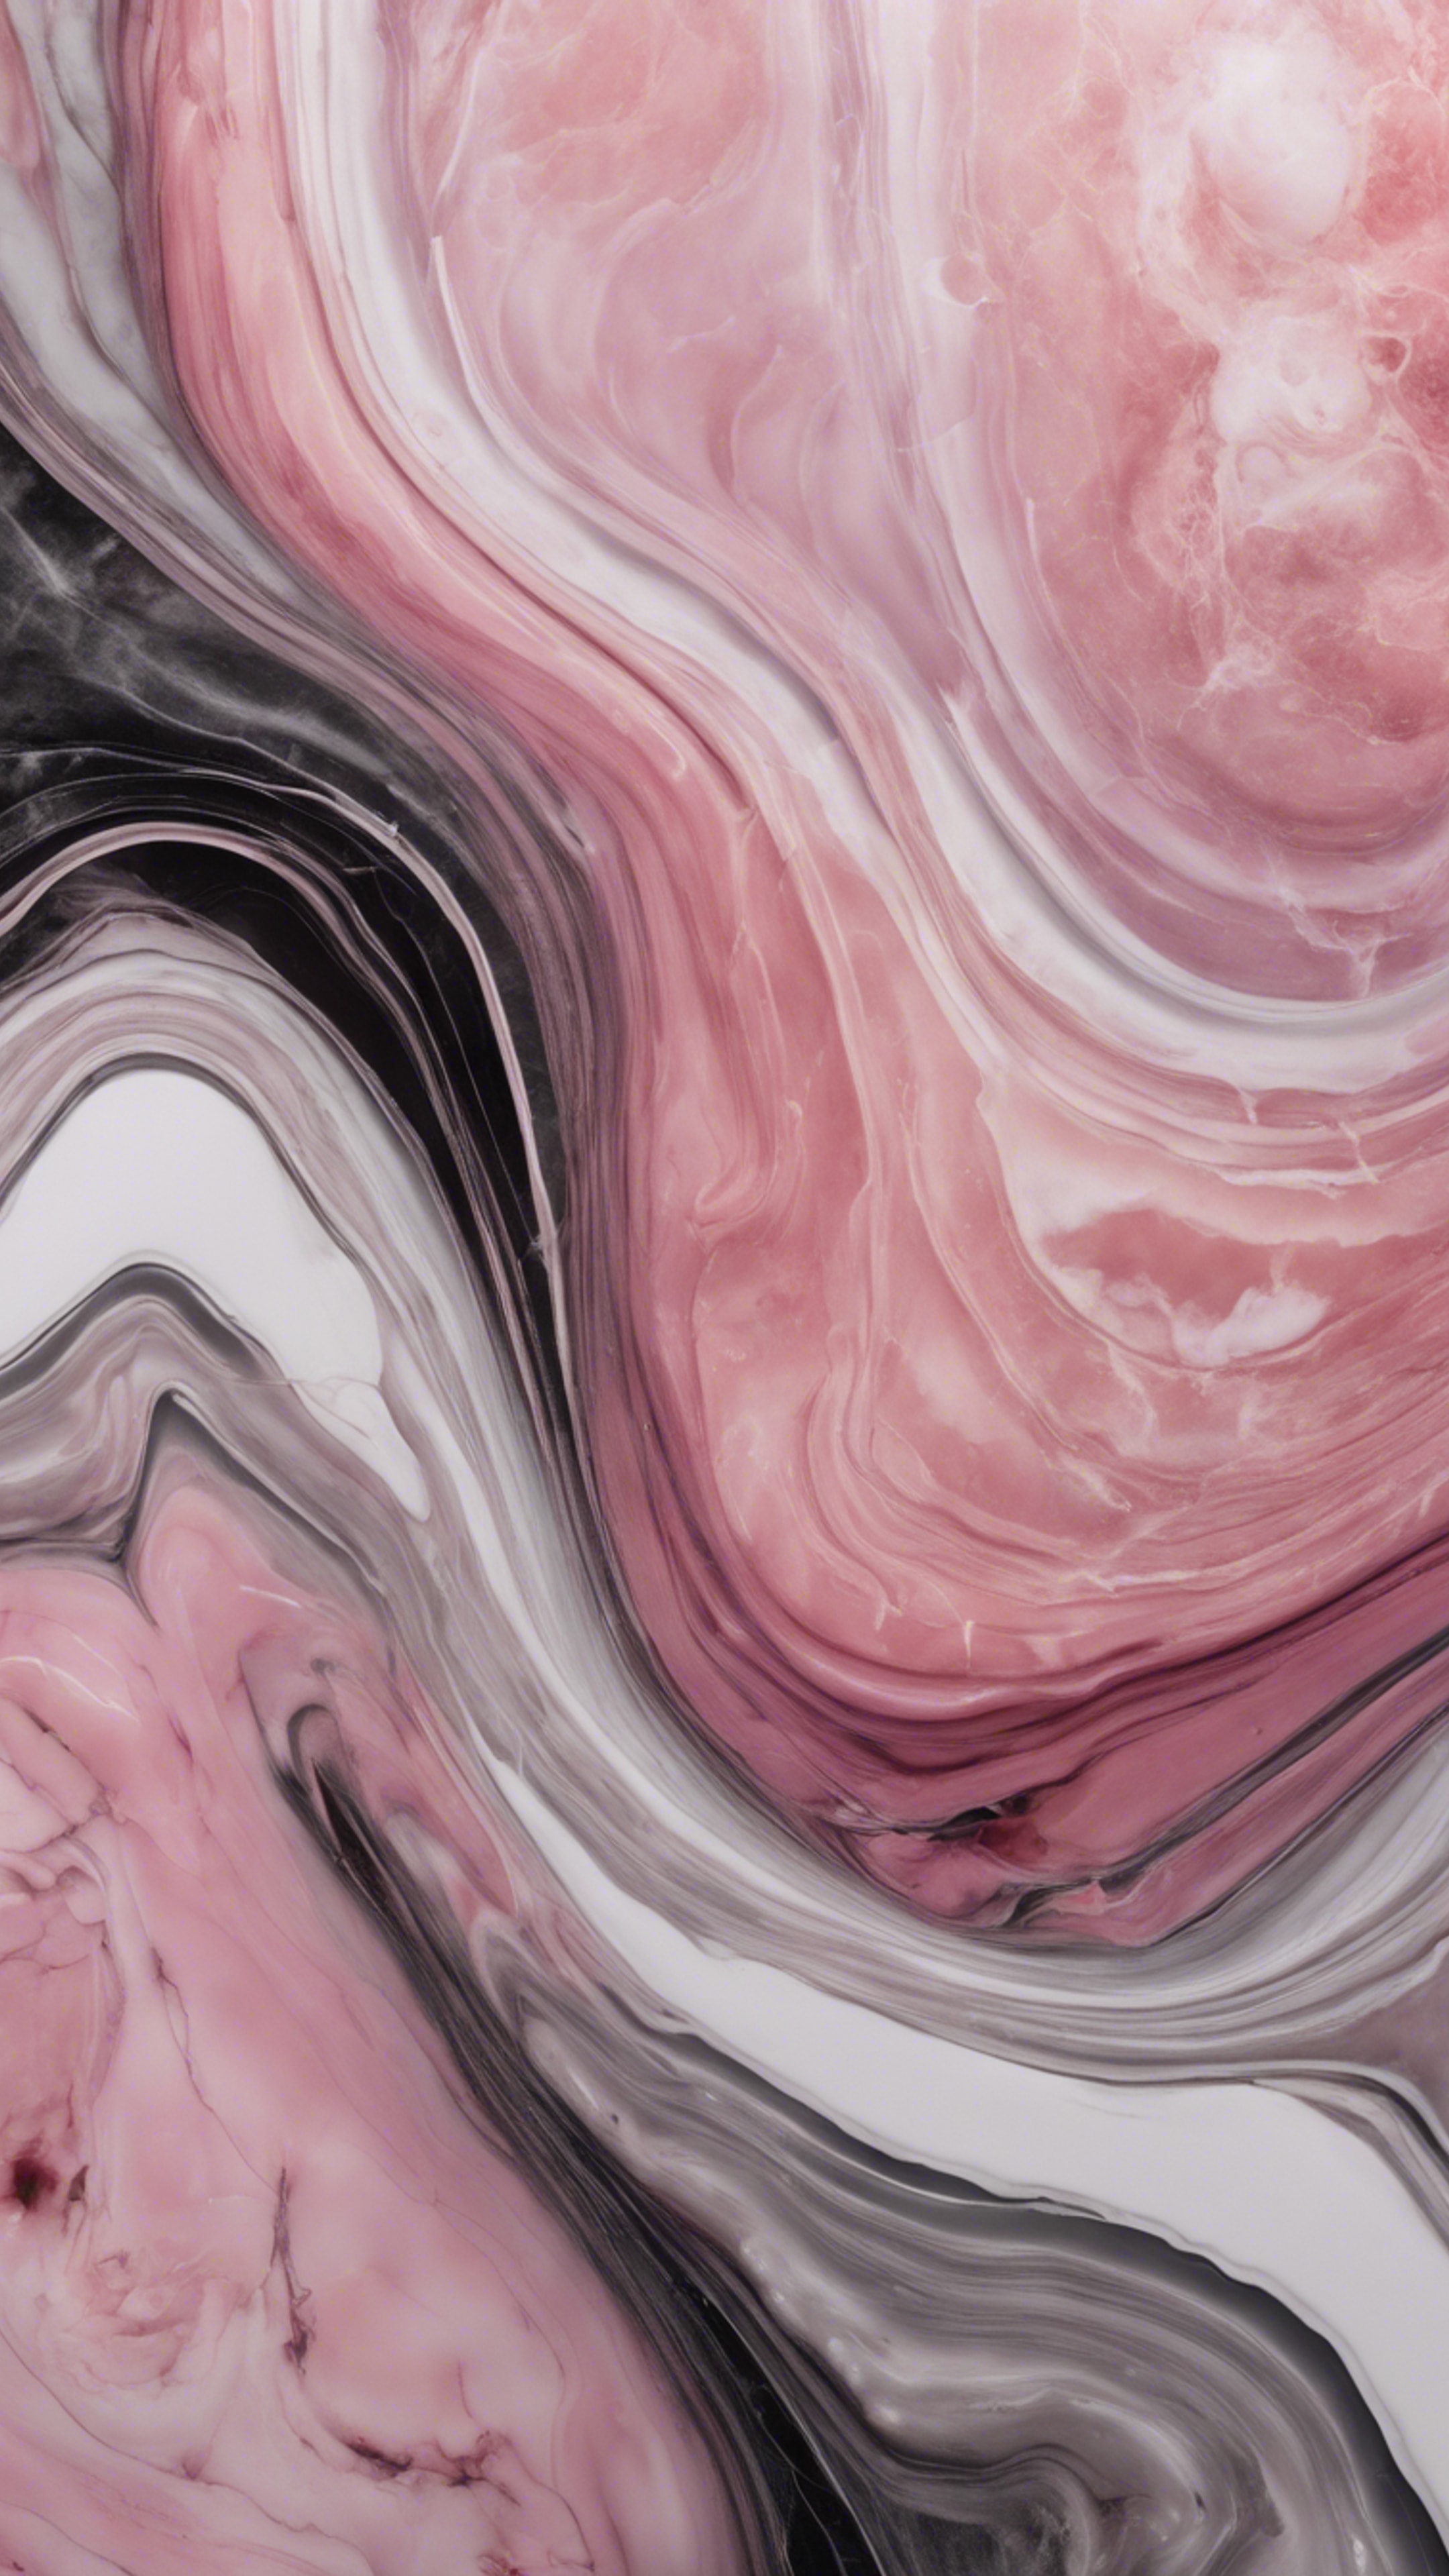 An abstract representation of pink marble, incorporating waves of deep pinks, soft whites, and dark greys. Дэлгэцийн зураг[5ac081f457bf4dc8ac1f]